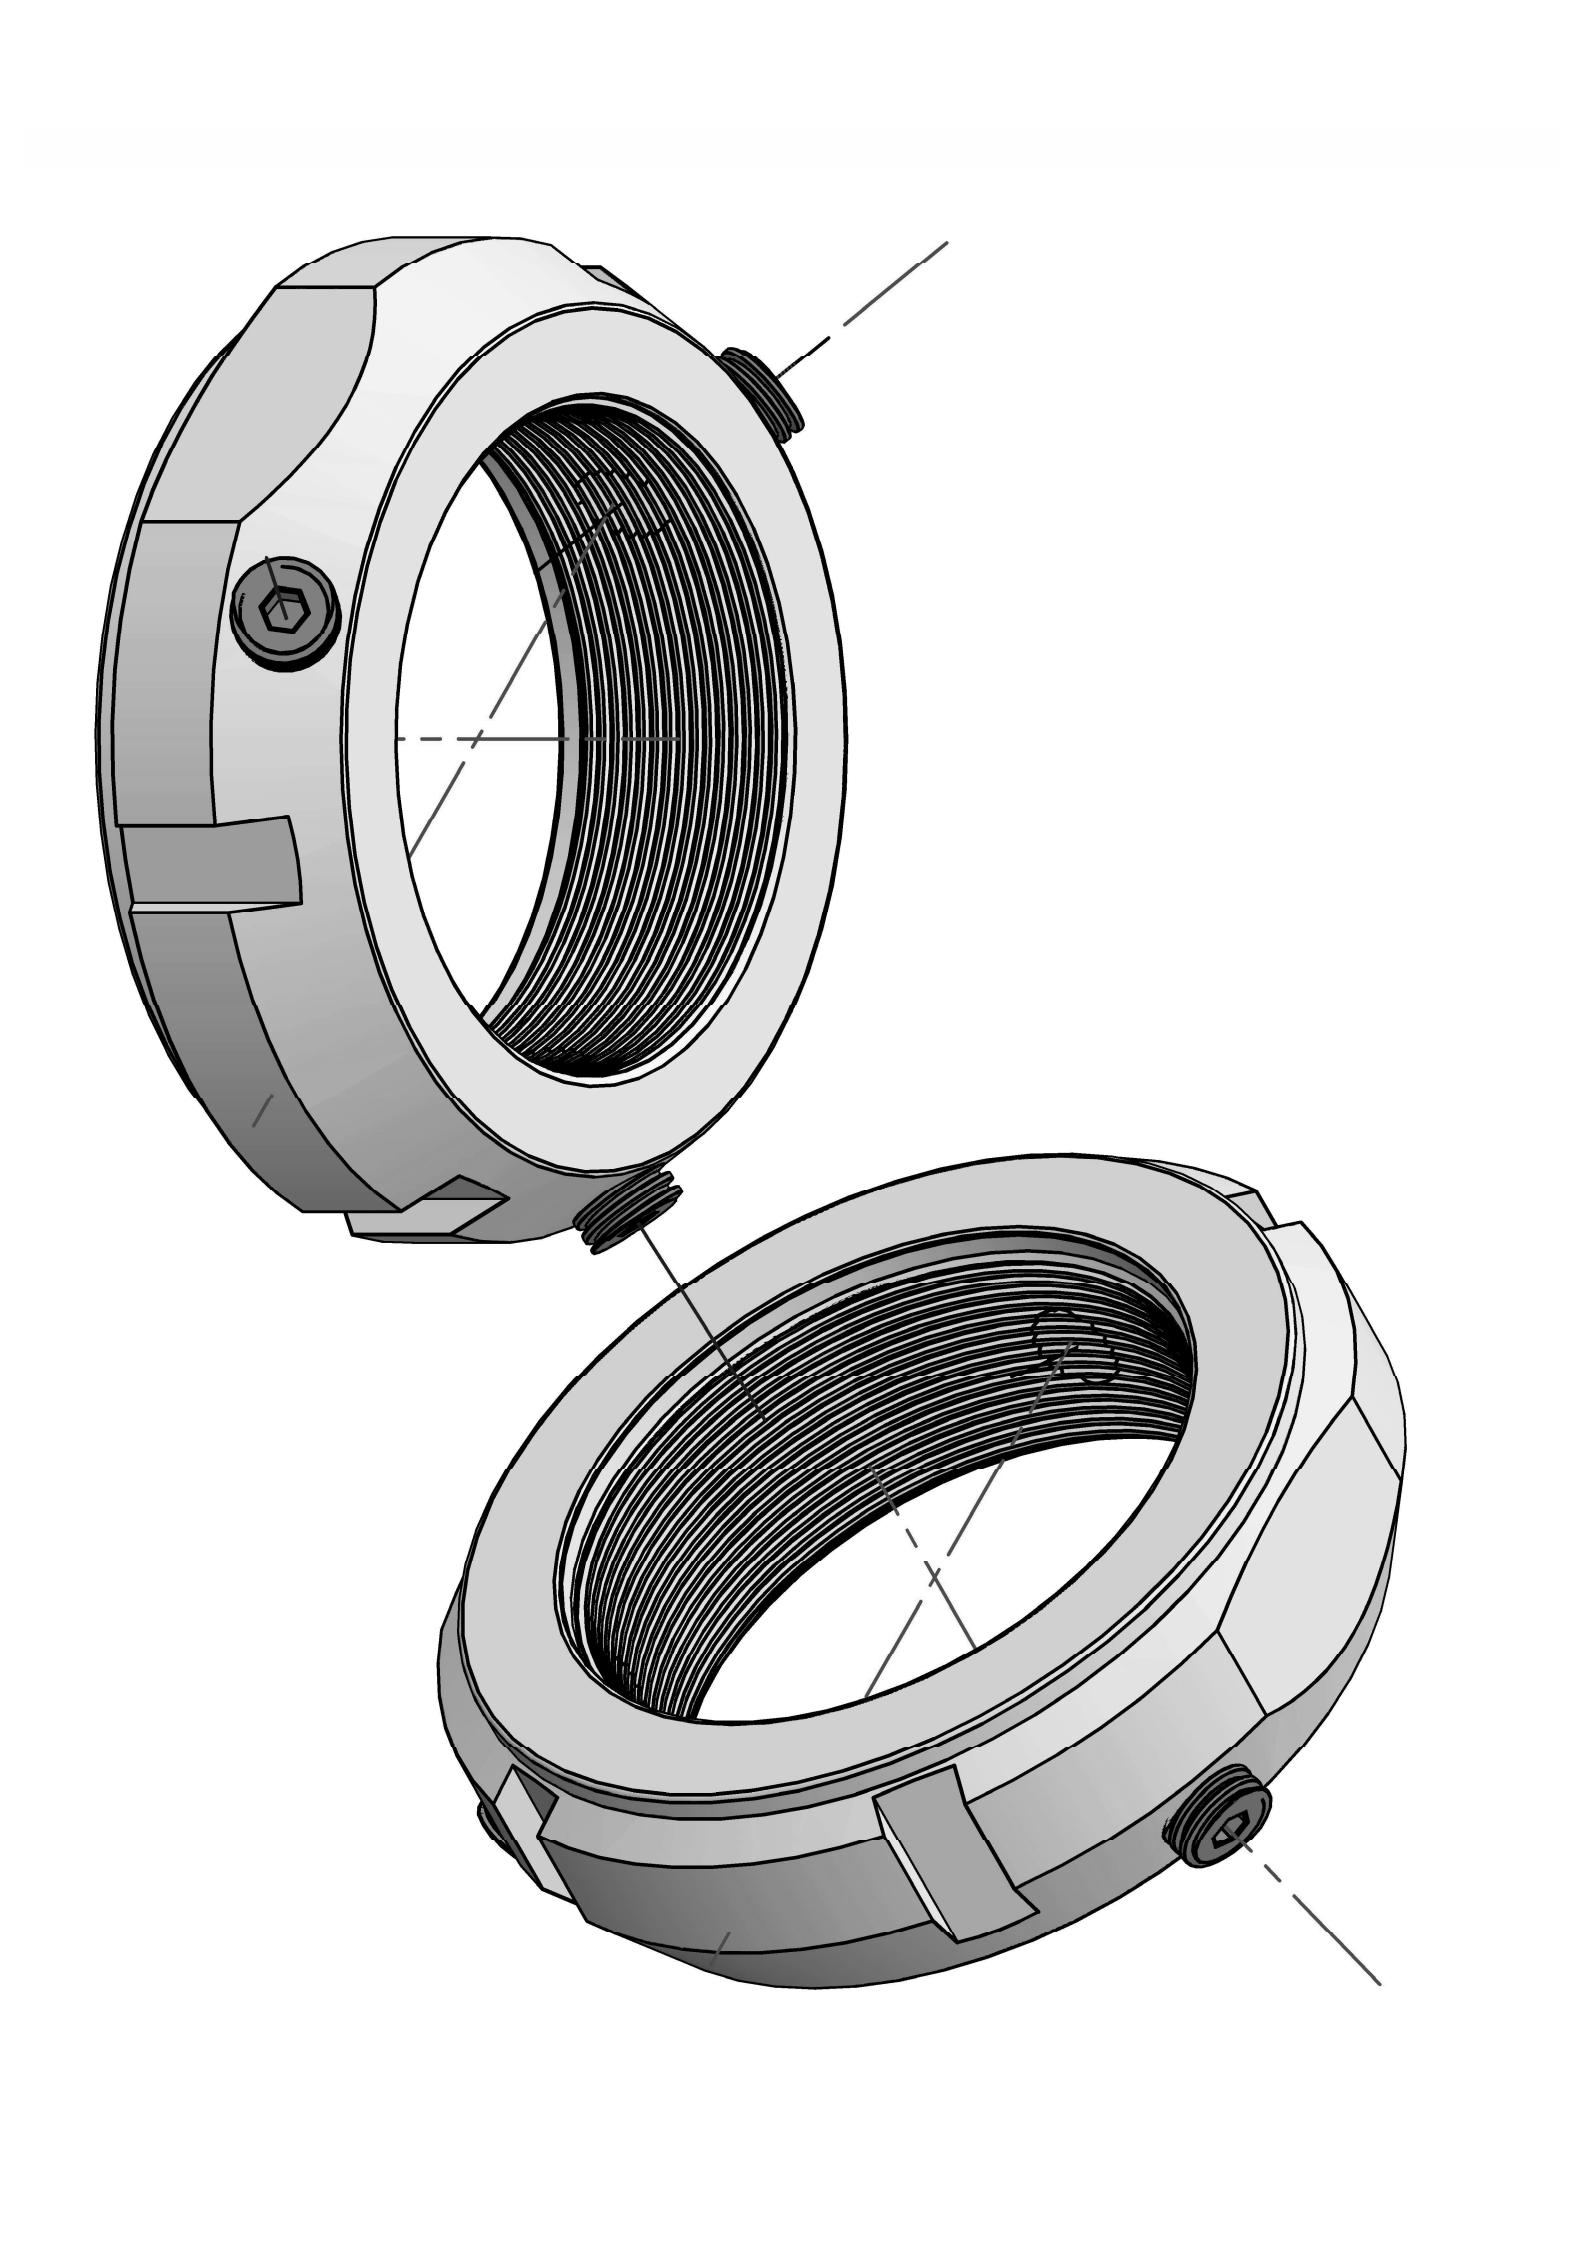 High-quality and reliable 51109 bearings for various industrial applications